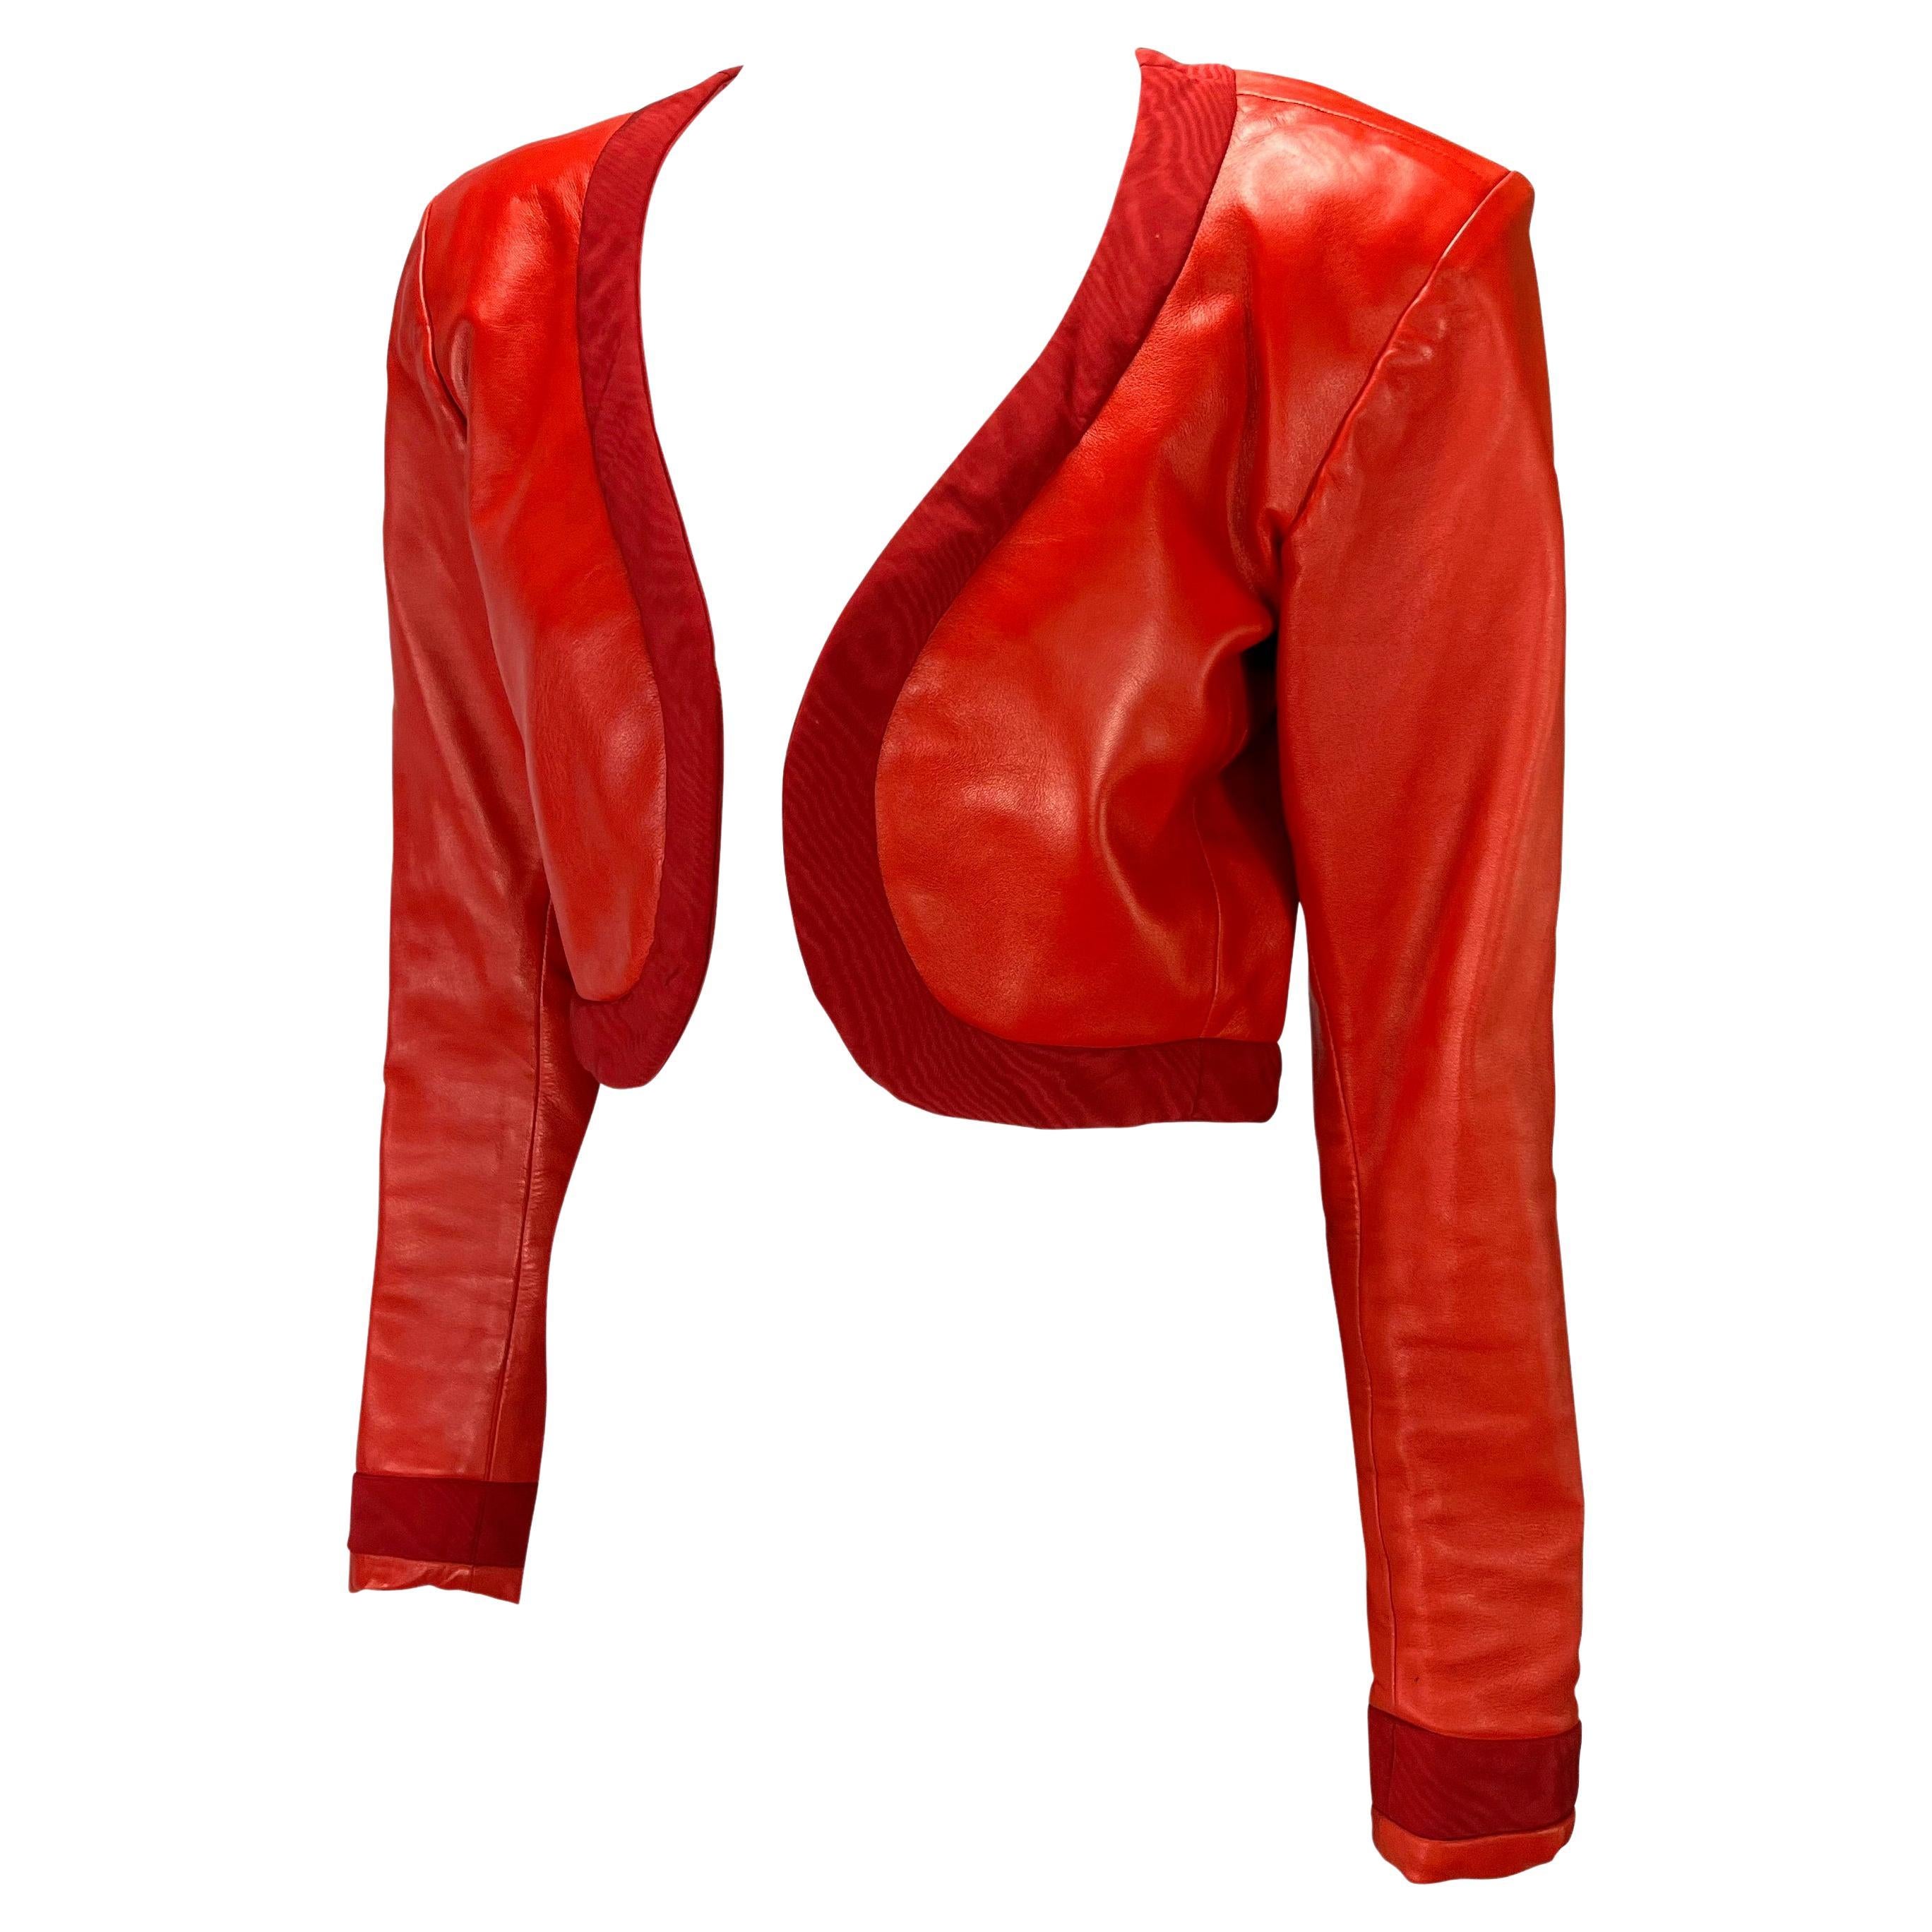 Presenting a bright red cropped leather Yves Saint Laurent Rive Gauche jacket designed by Yves Saint Laurent. From the Spring/Summer 1990 collection, this fabulous bolero is constructed almost entirely of leather and is made complete with a wide